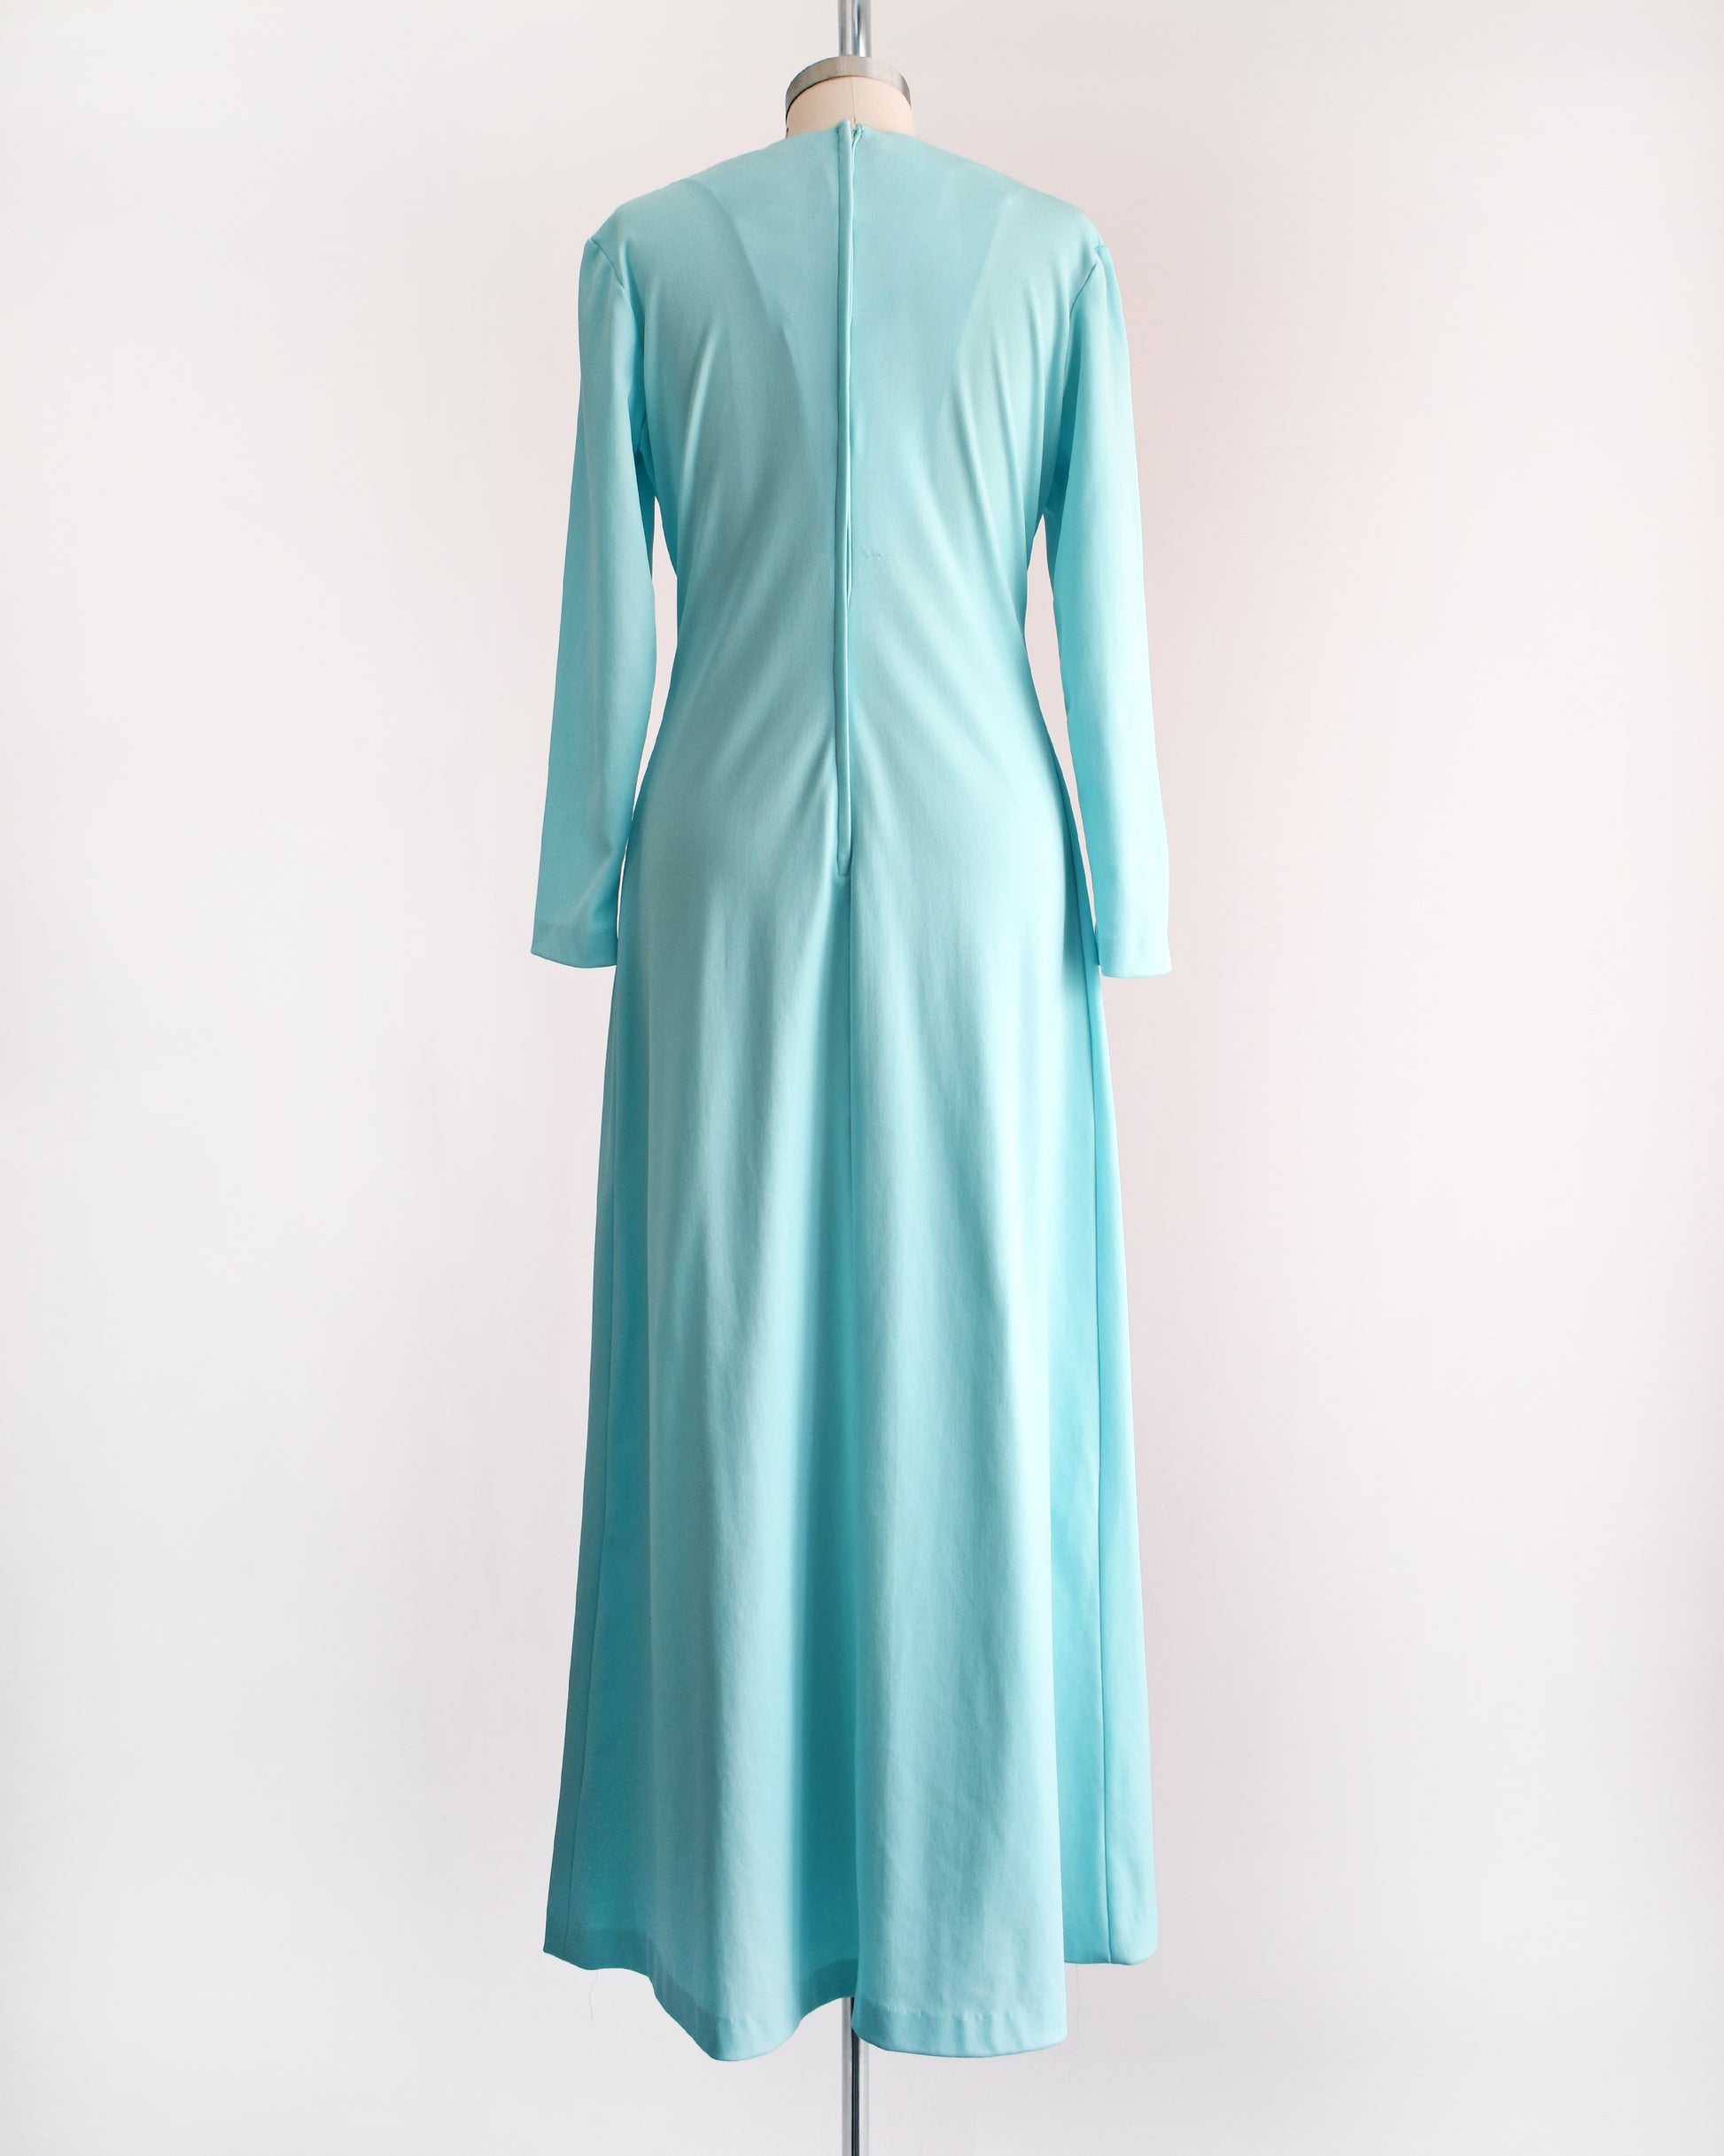 back view of a vintage 1970s light blue maxi dress that has rhinestones on the bodice, a plunging v-neckline, and long sleeves